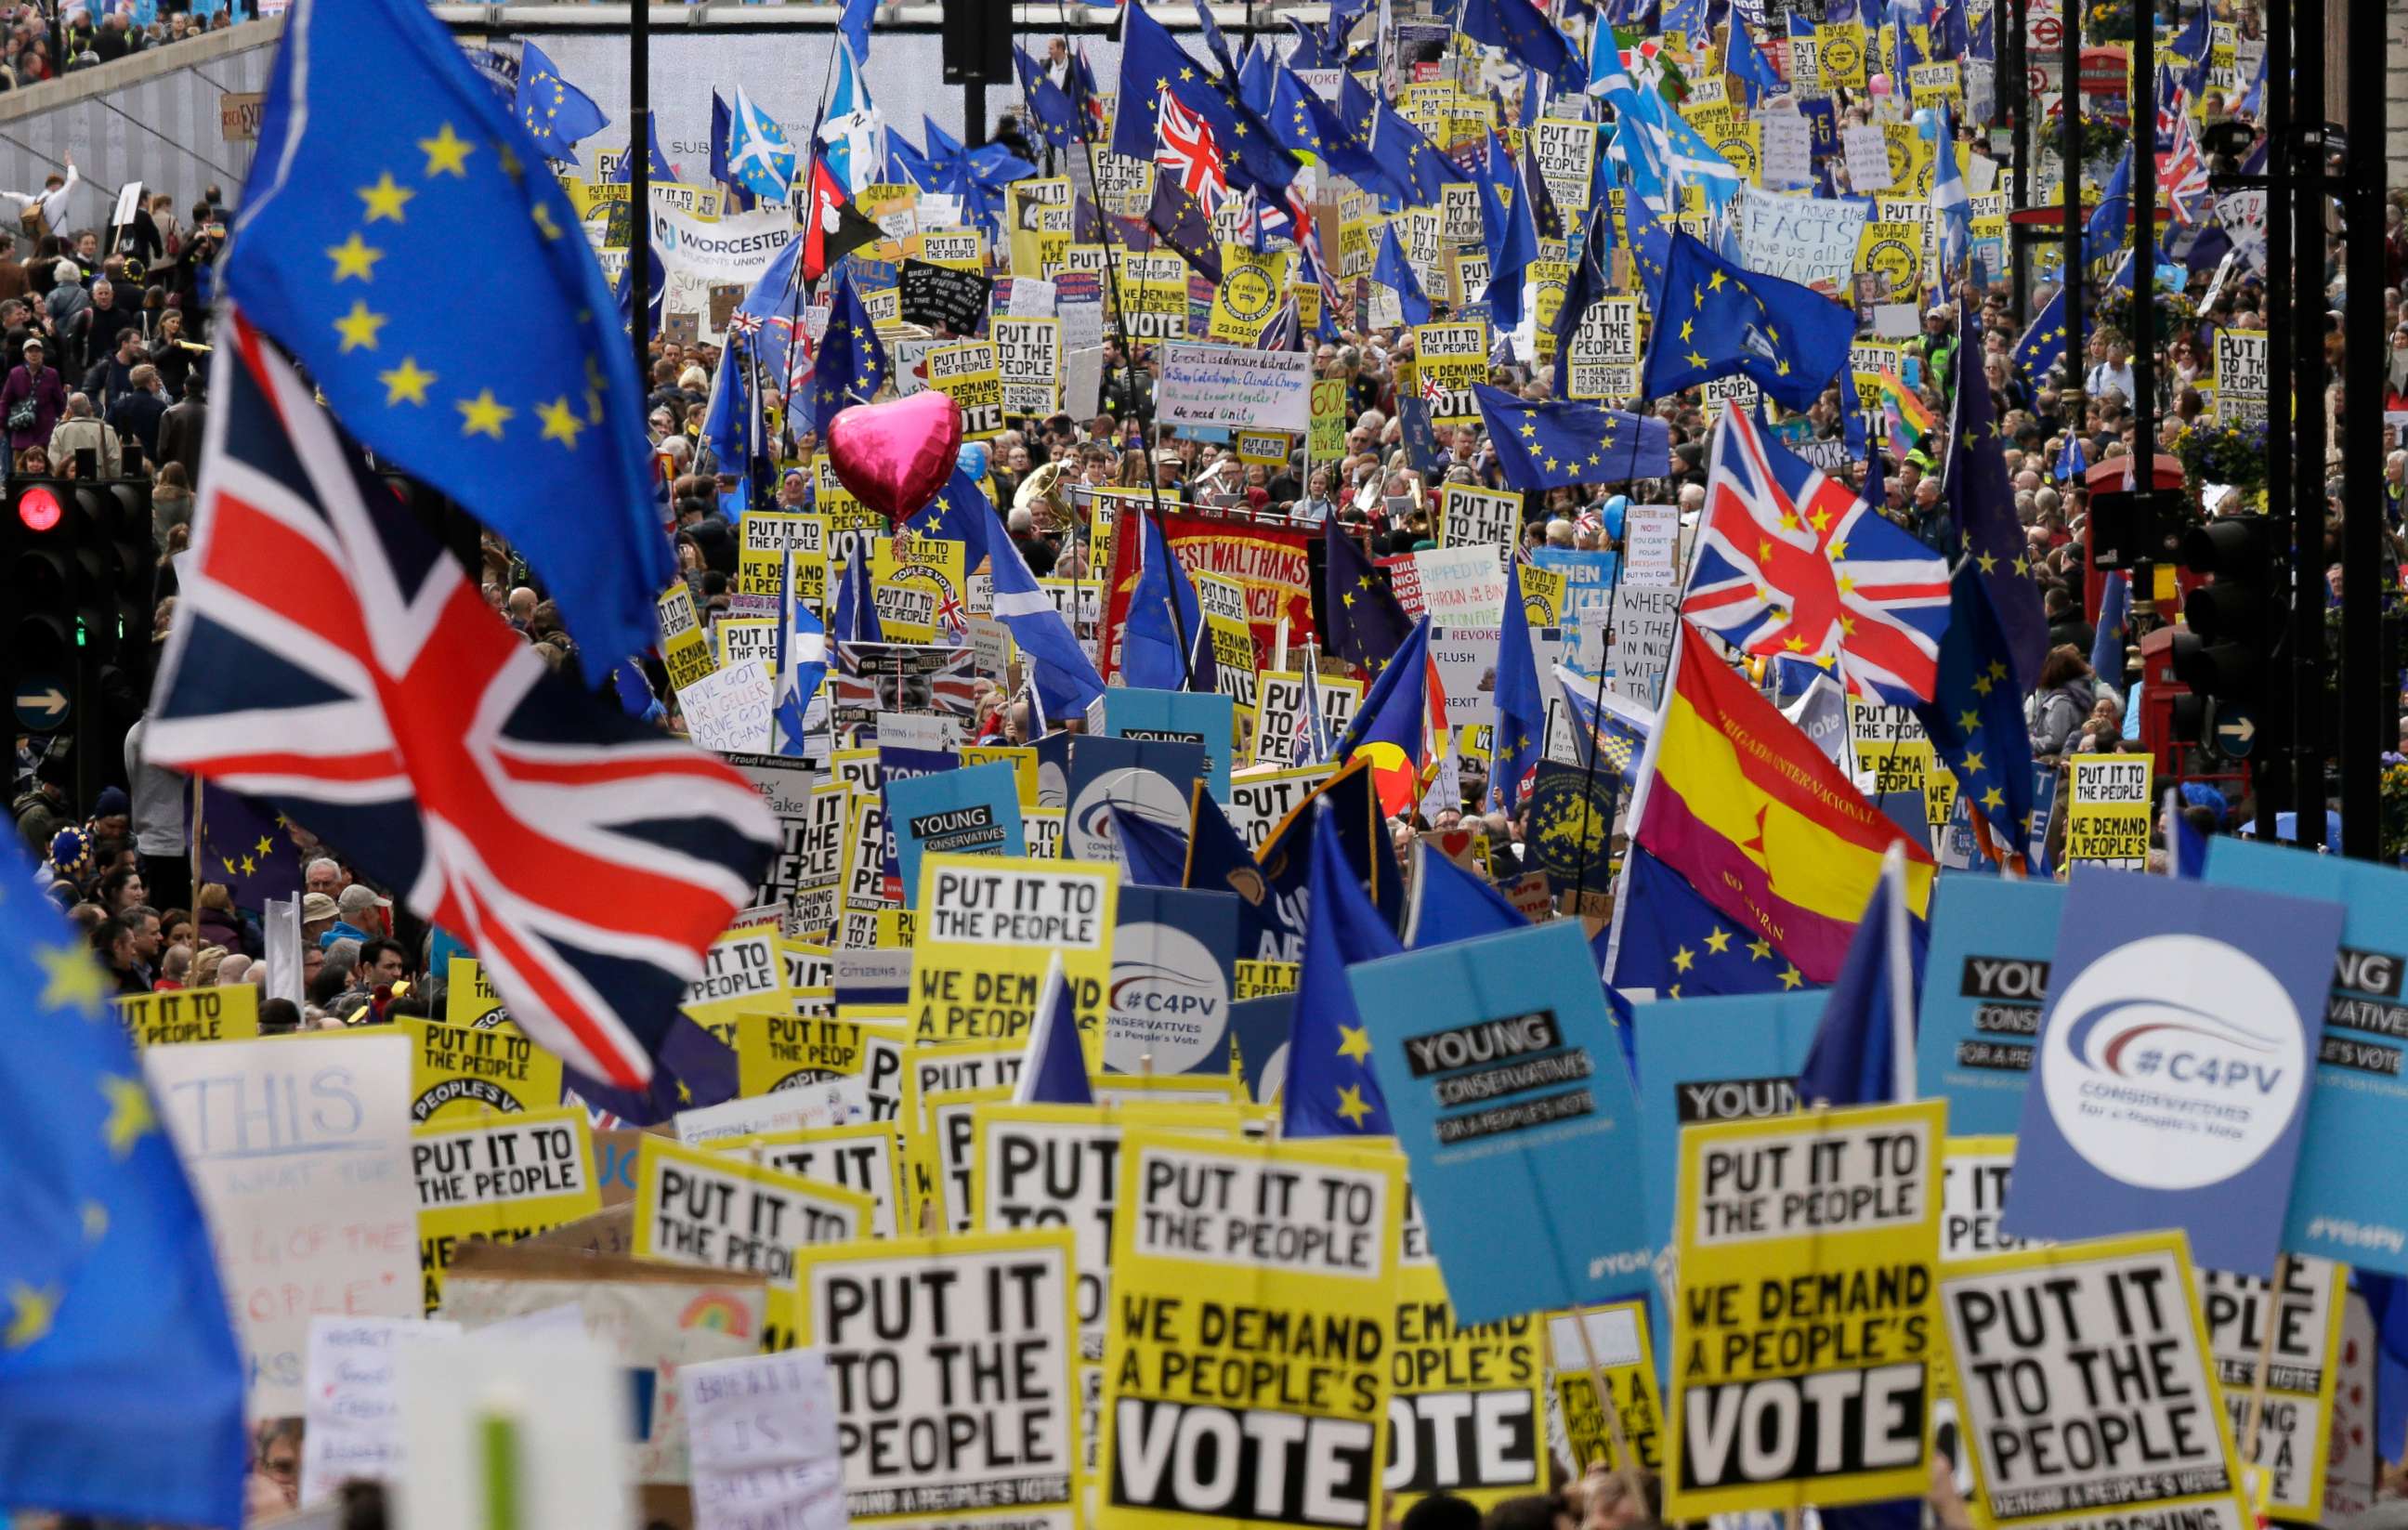 PHOTO: Demonstrators carry posters and flags during a Peoples Vote anti-Brexit march in London, March 23, 2019. 